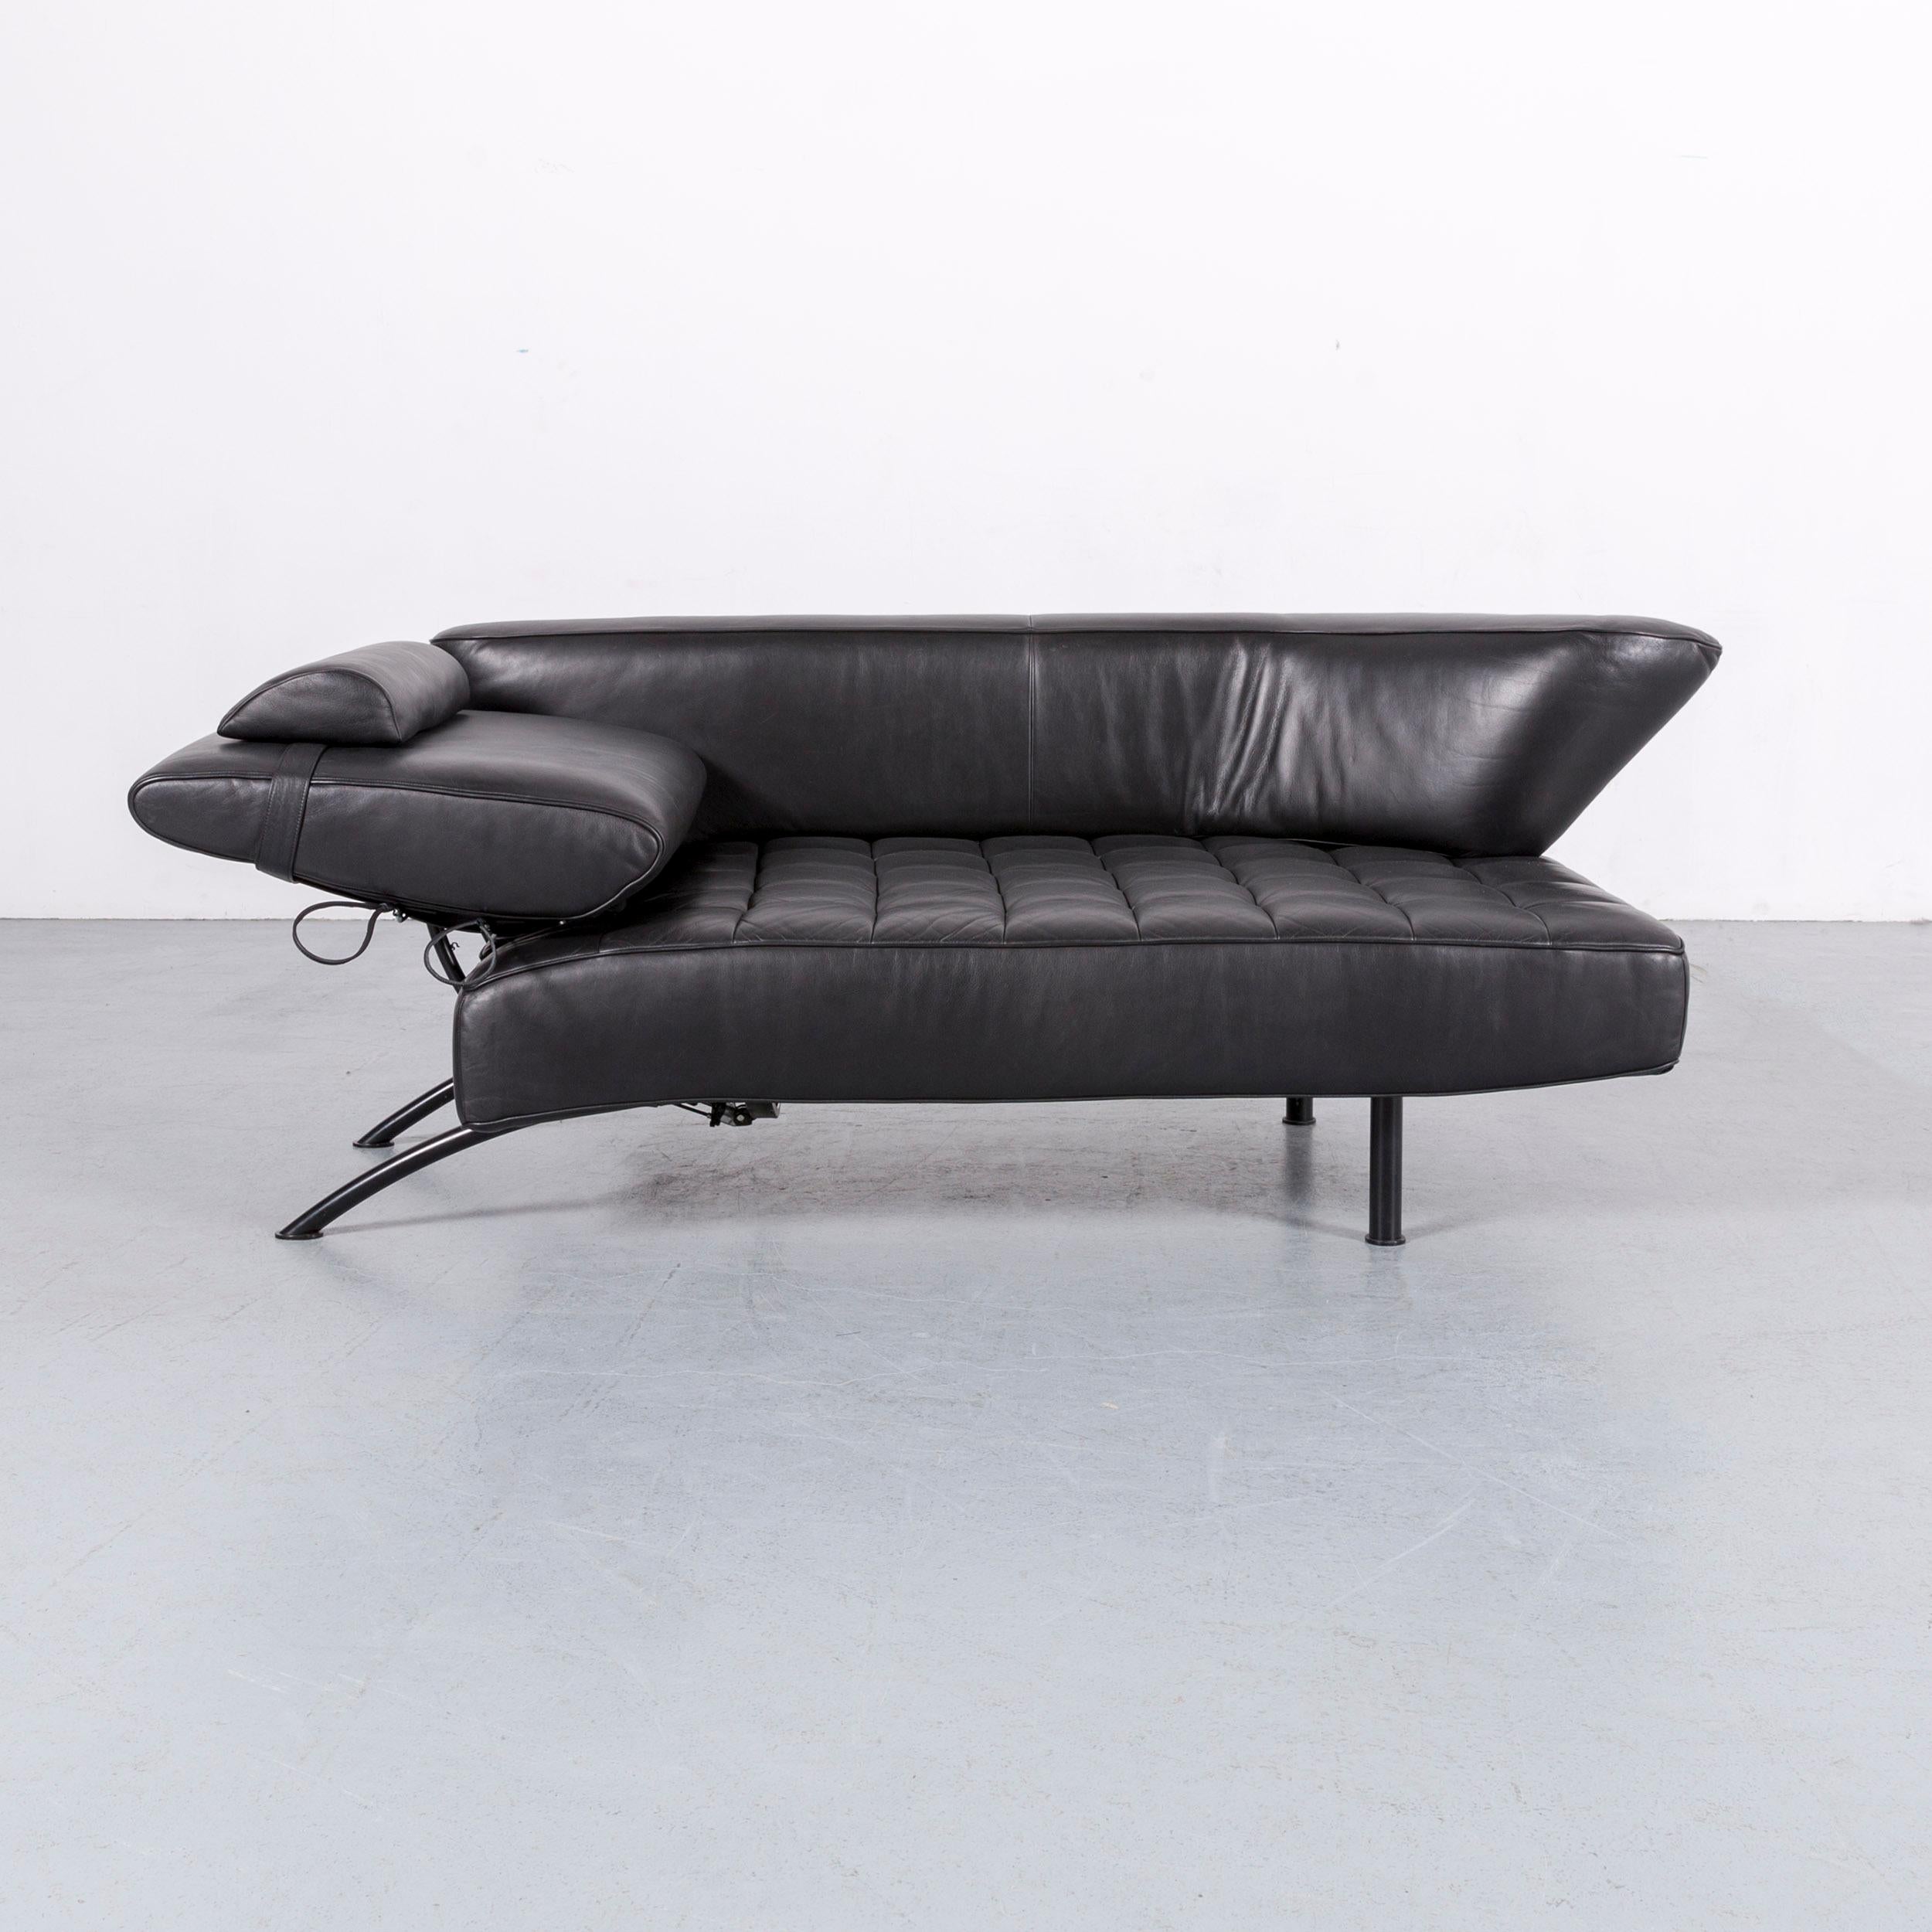 We bring to you a de Sede DS 144 leather sofa black two-seat lounger real leather function.

Product measurements in centimetres:

Depth 94
Width 205
Height 79
Seat-height 41
Rest-height 62
Seat-depth 75
Seat-width 
Back-height.

   